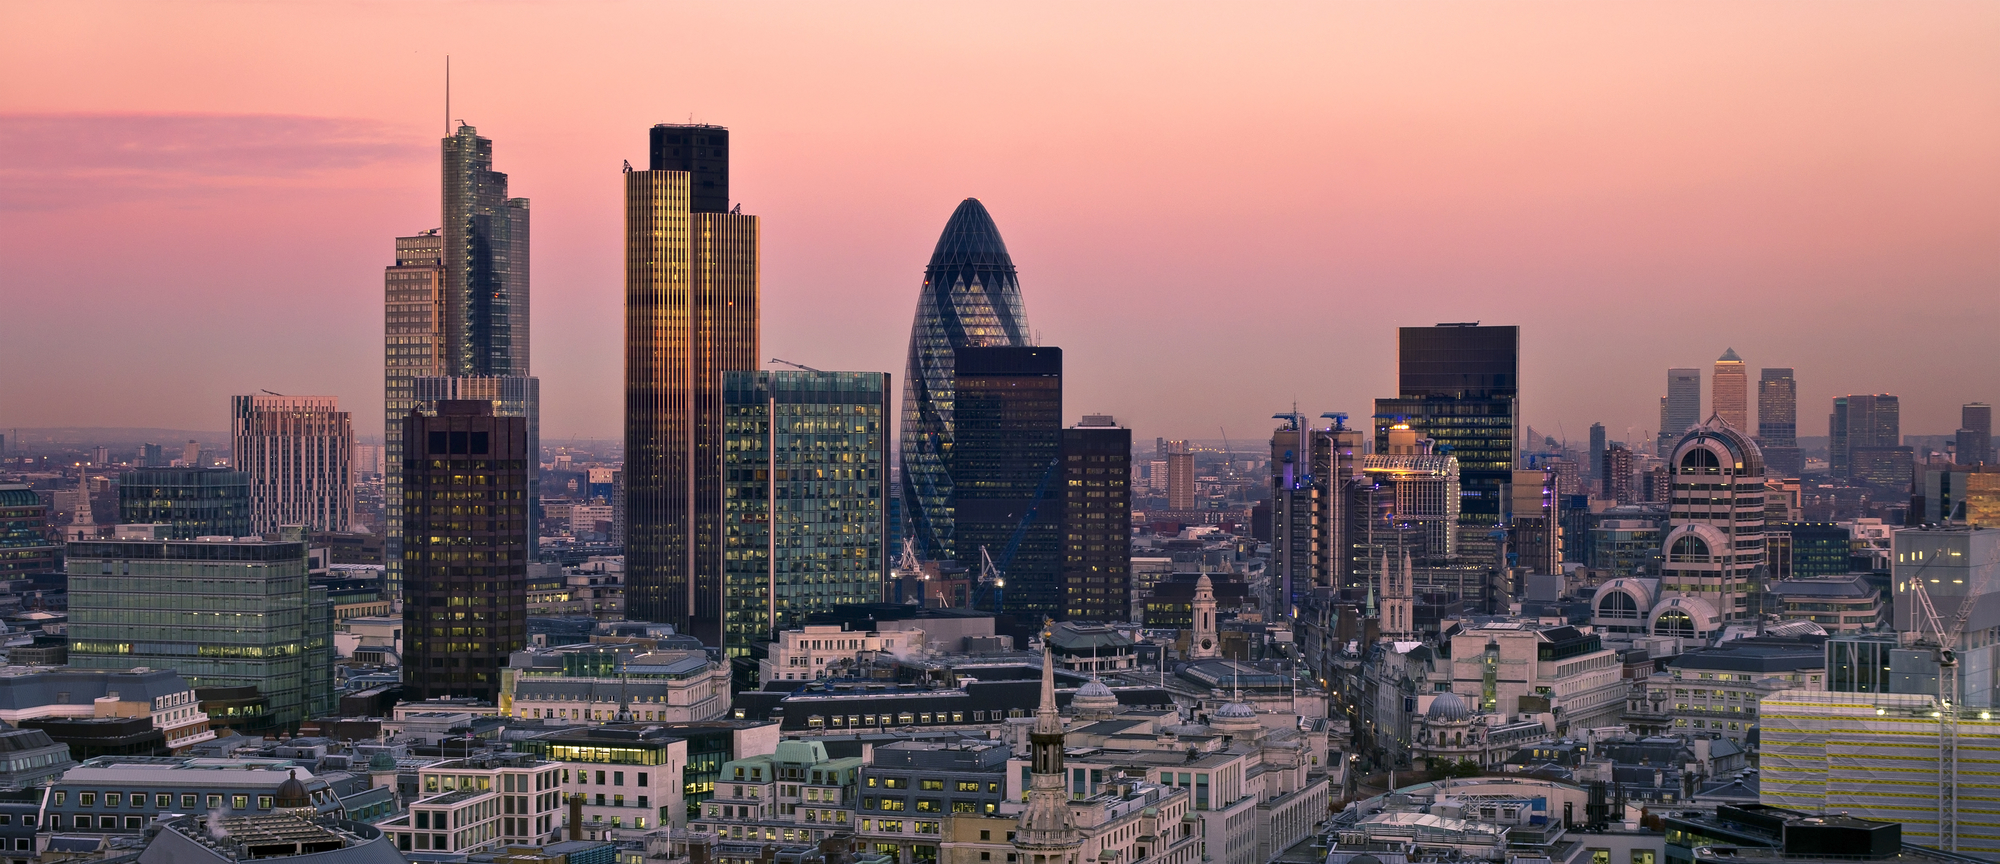 City of London one of the leading centres of global finance. This view includes Tower 42 Gherkin,Willis Building, Stock Exchange Tower and Lloyd`s of London and Canary Wharf at the background.